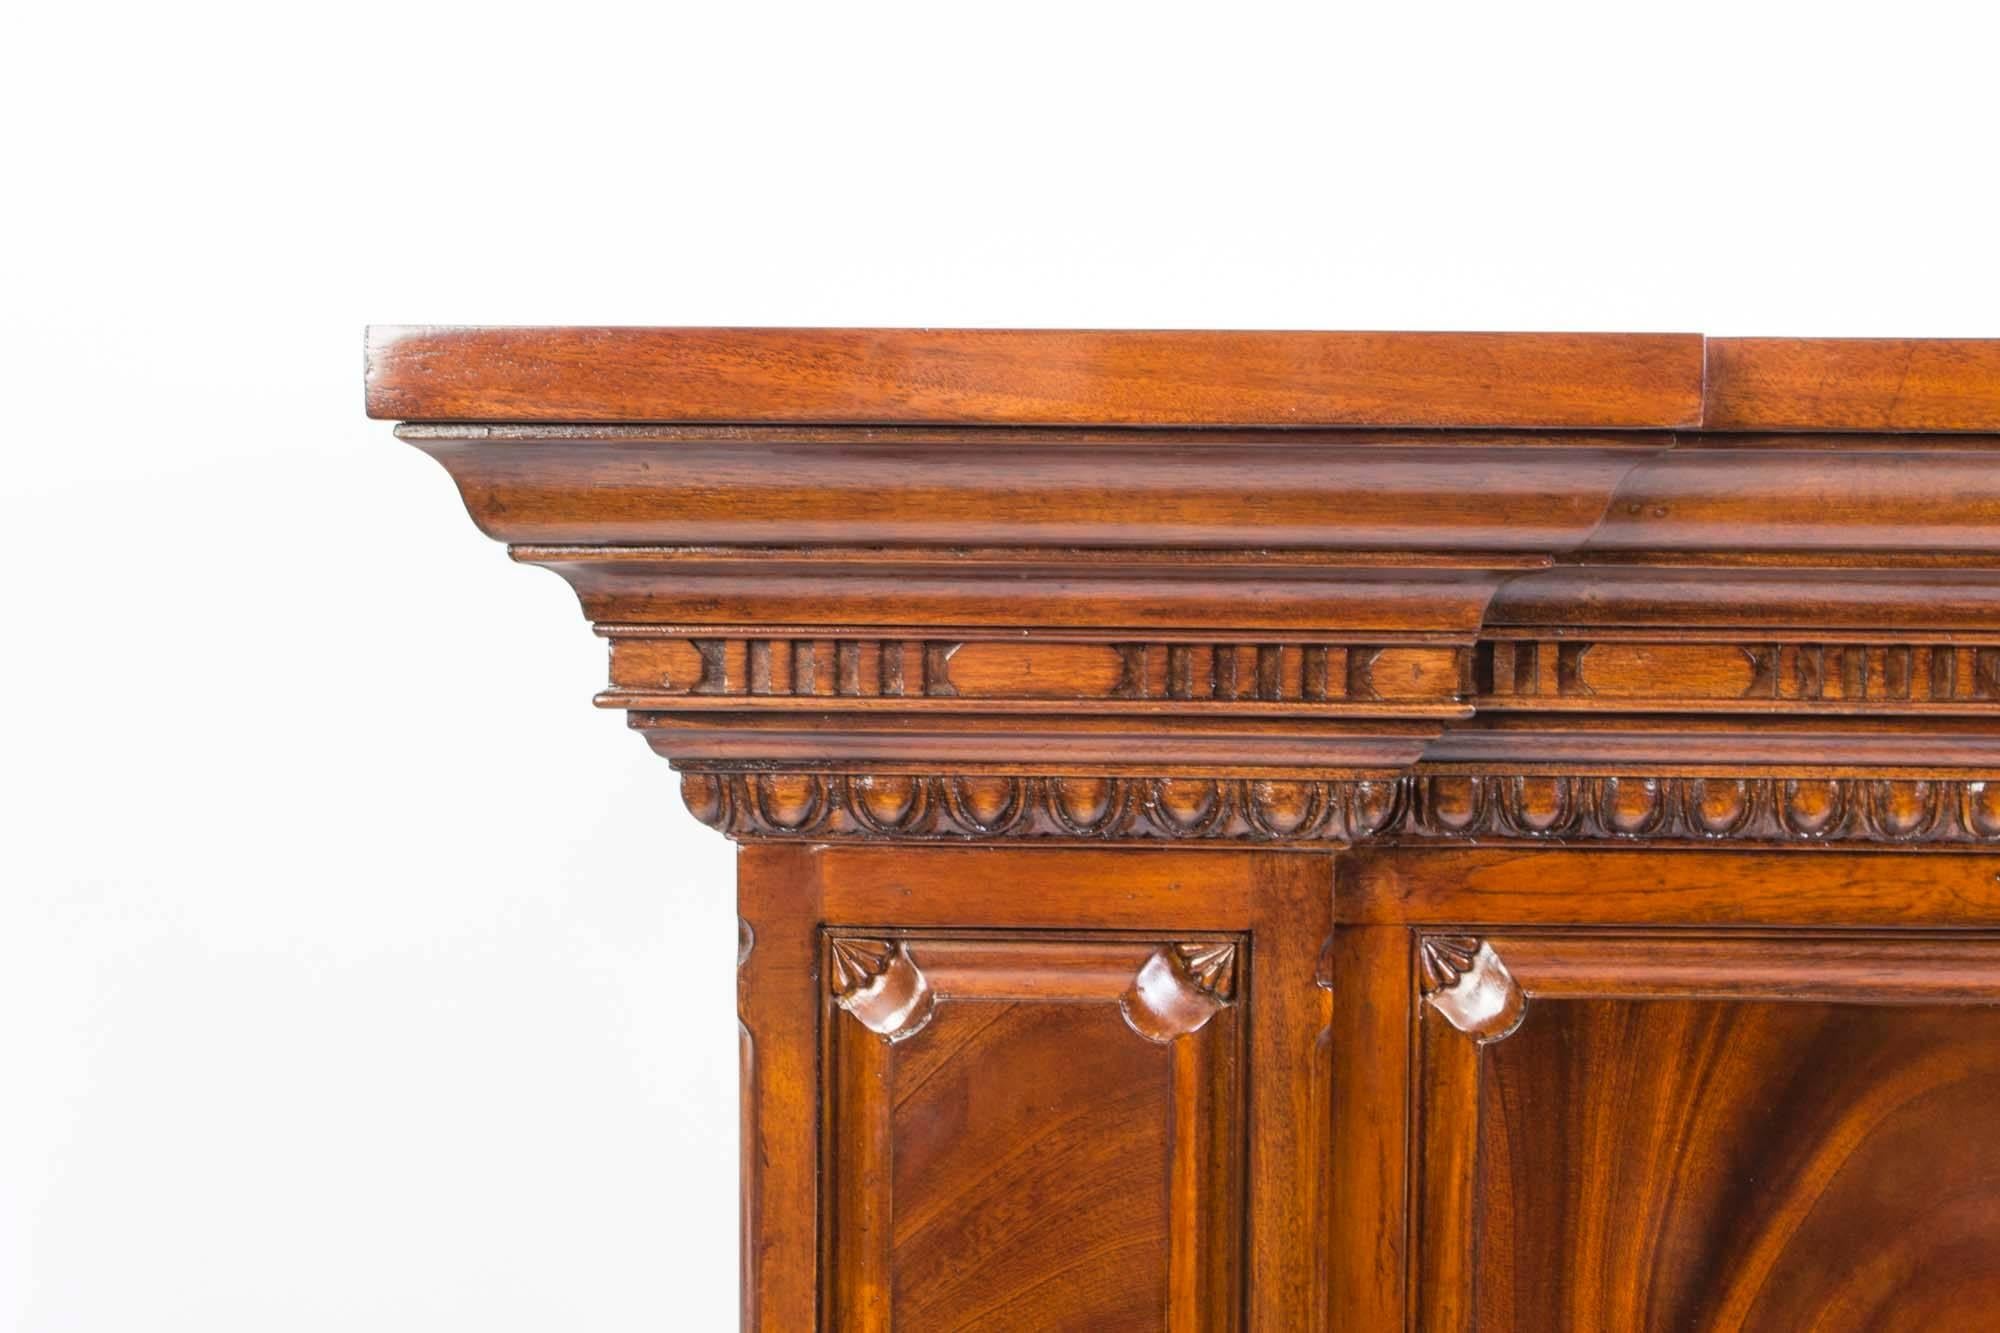 His is a superb flame mahogany fire surround in timeless Victorian style which will look amazing in any period or country style surroundings, dating from the last quarter of the 20th century.

The flame mahogany is enhanced by the superb hand